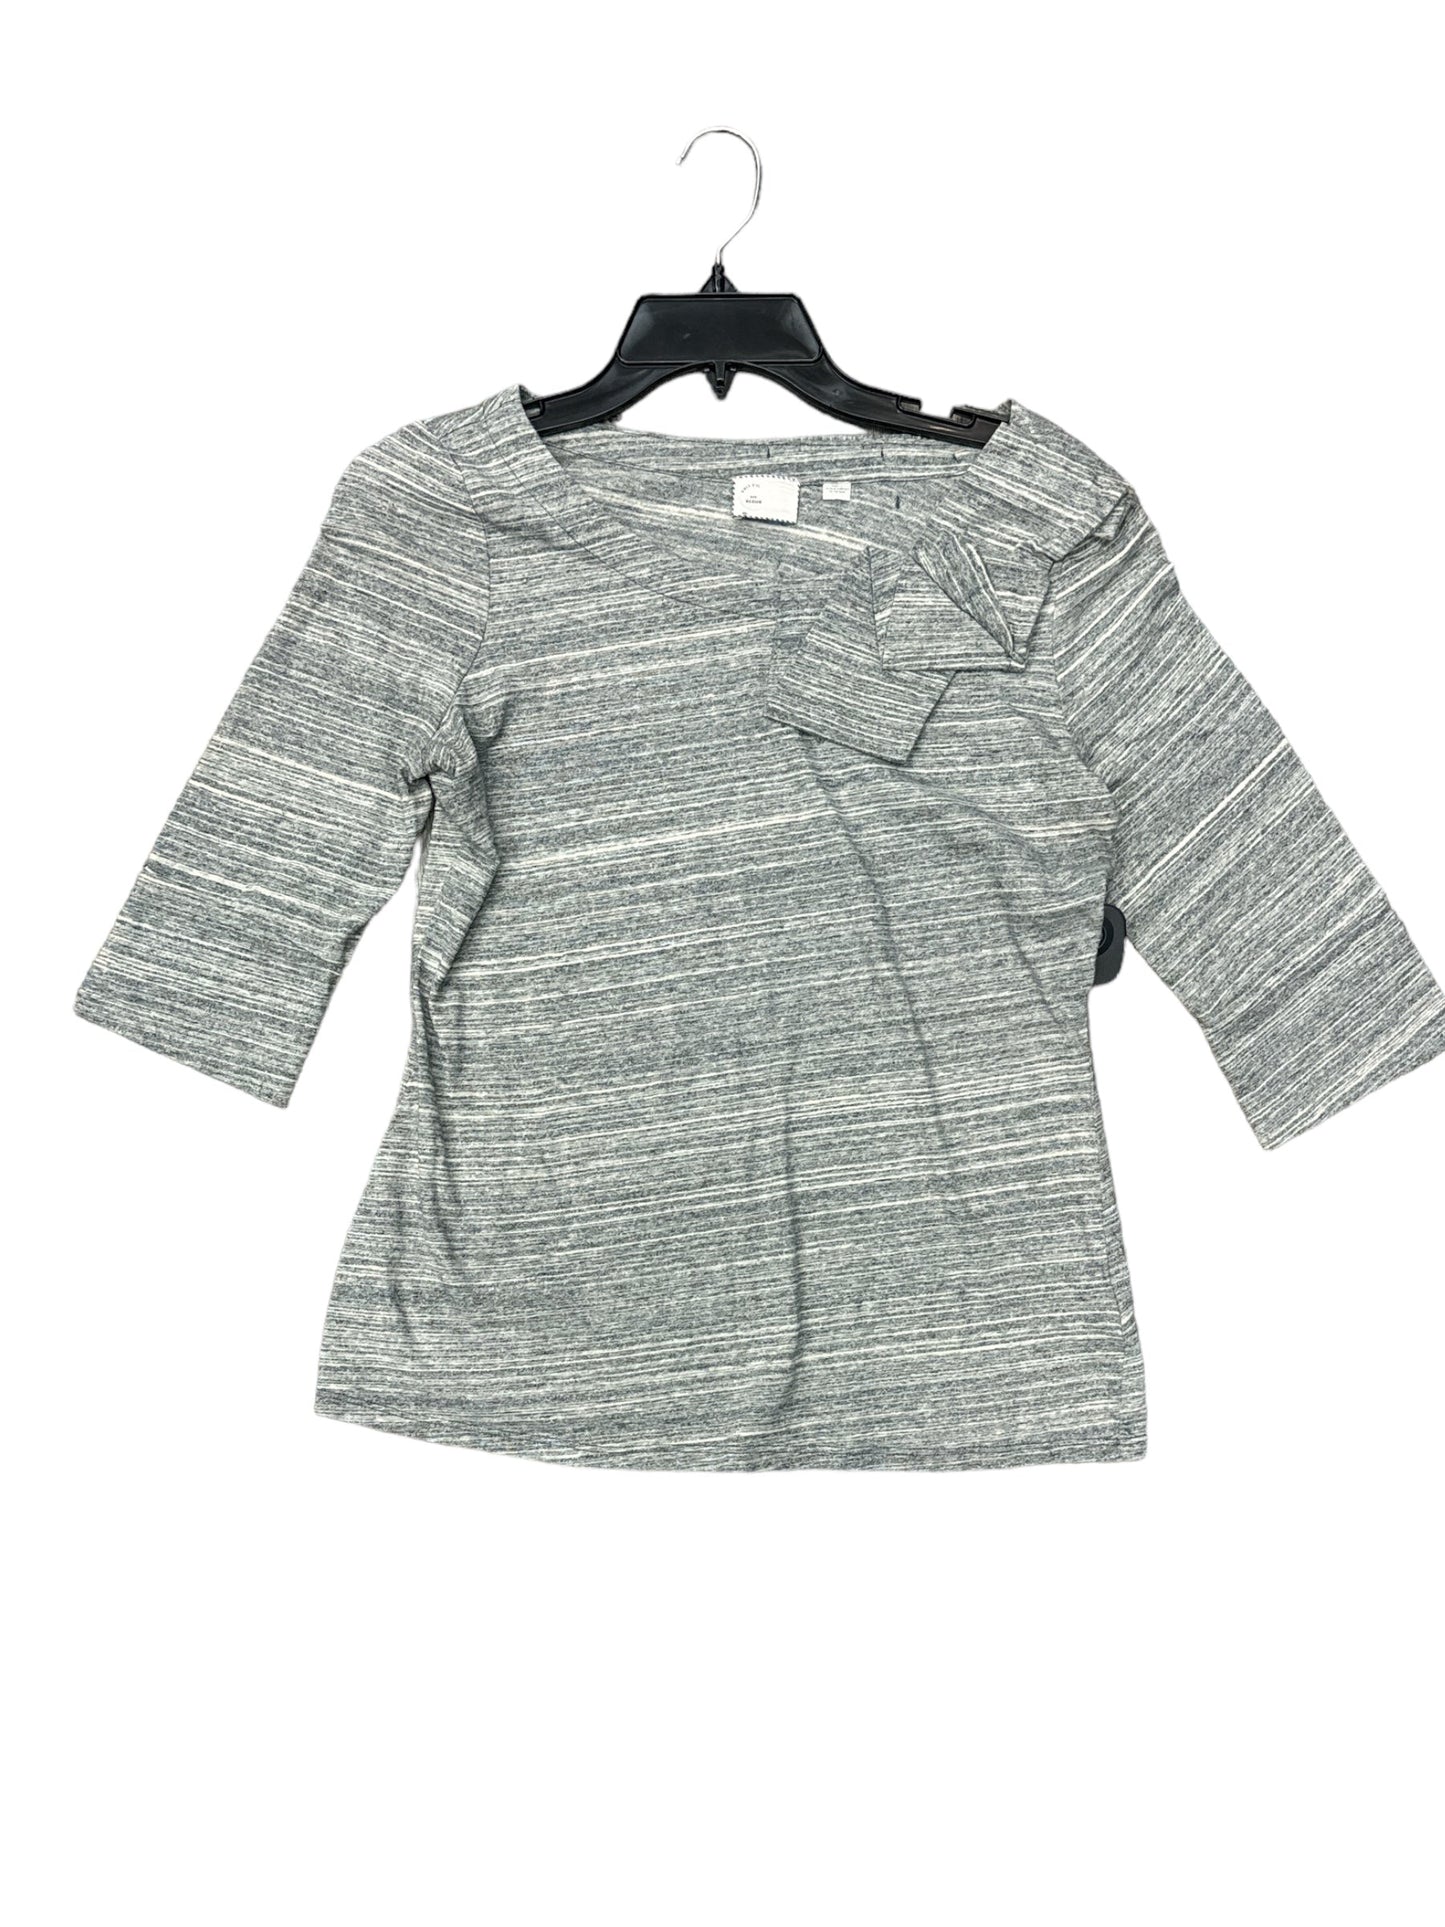 Grey Top 3/4 Sleeve Anthropologie, Size M